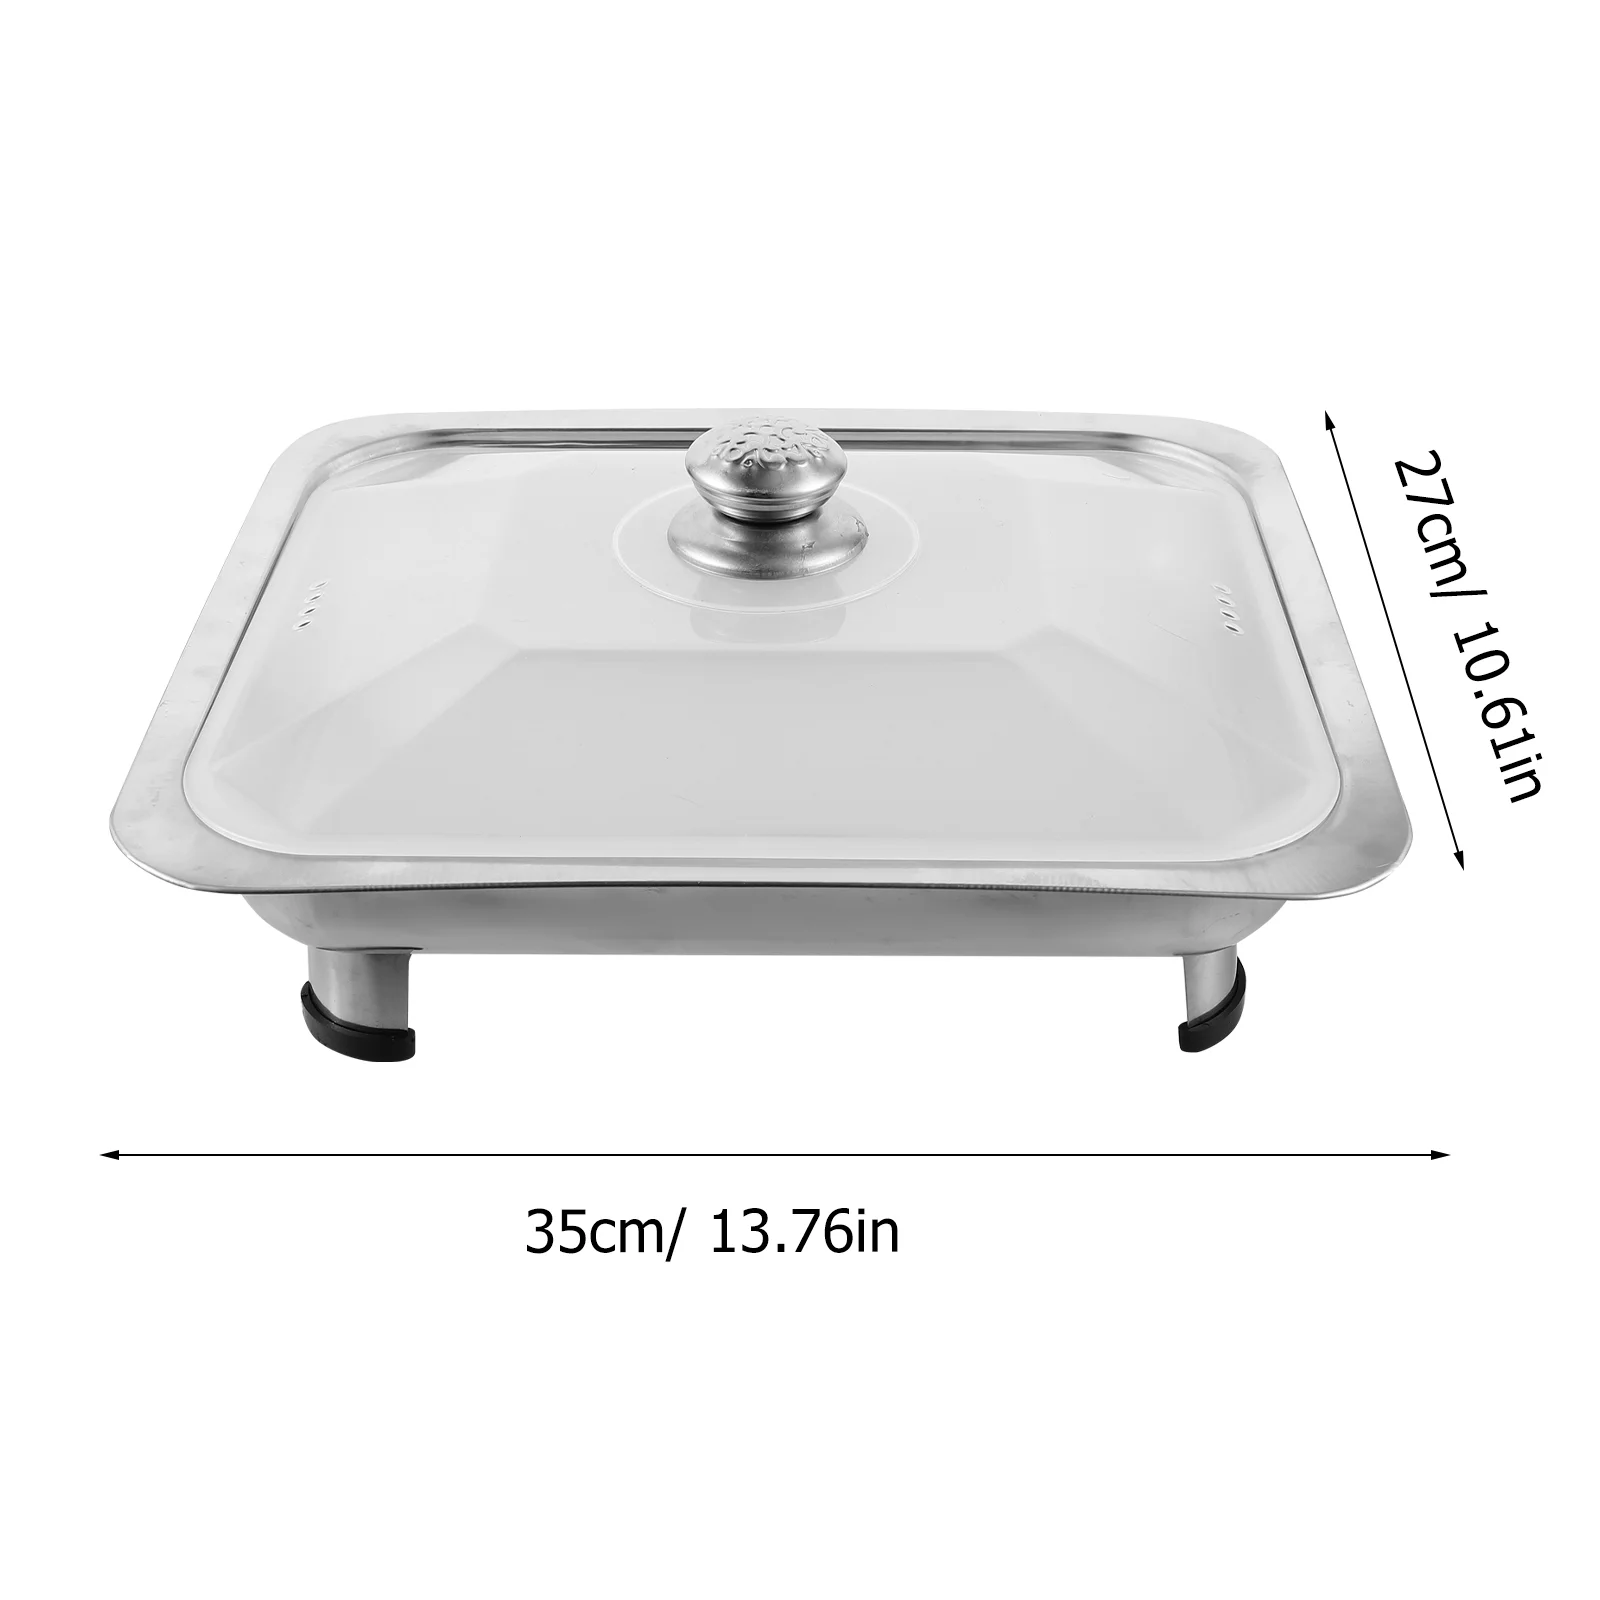 Chafing Dish Buffet Set Stainless Steel Rectangular Chafers Cover Lid Buffet Server Food Warmer Catering Pan Hot Steam